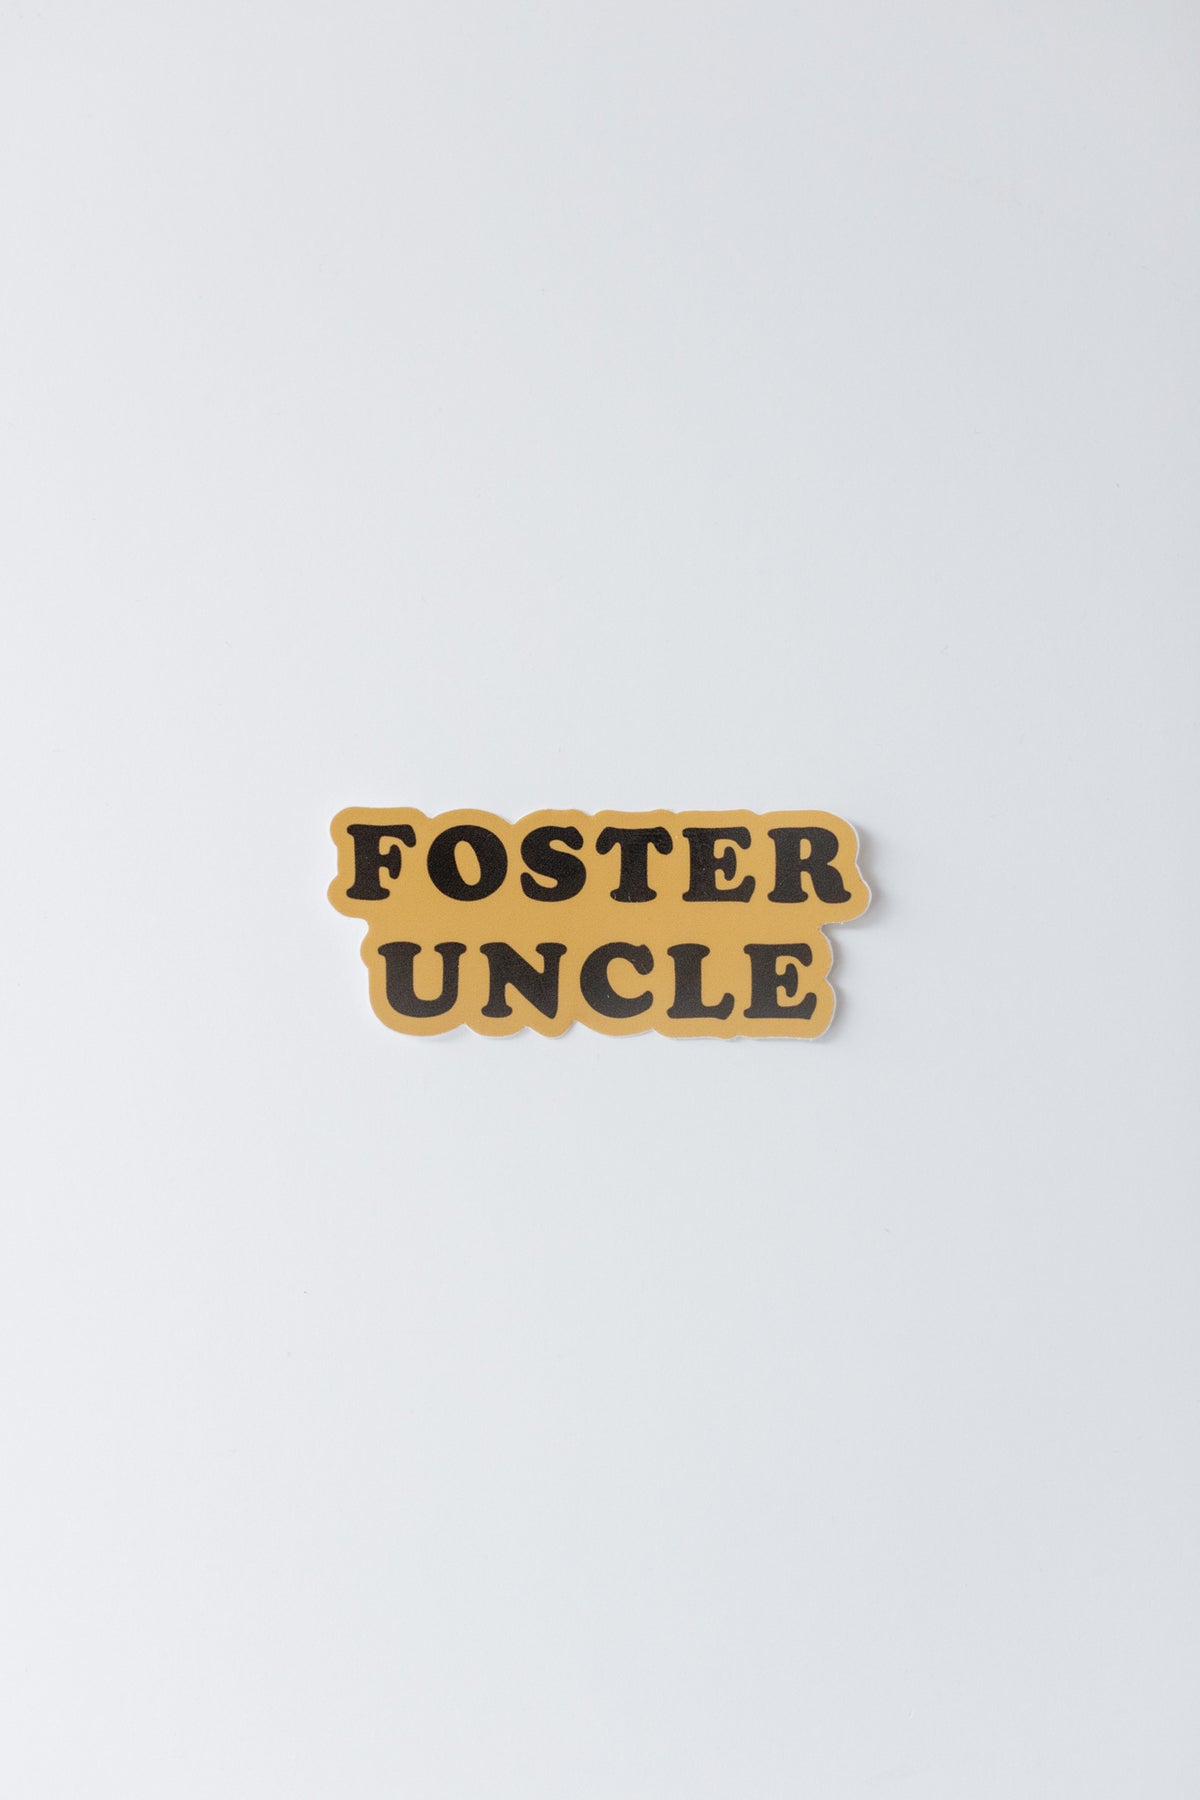 FOSTER FAMILY STICKERS